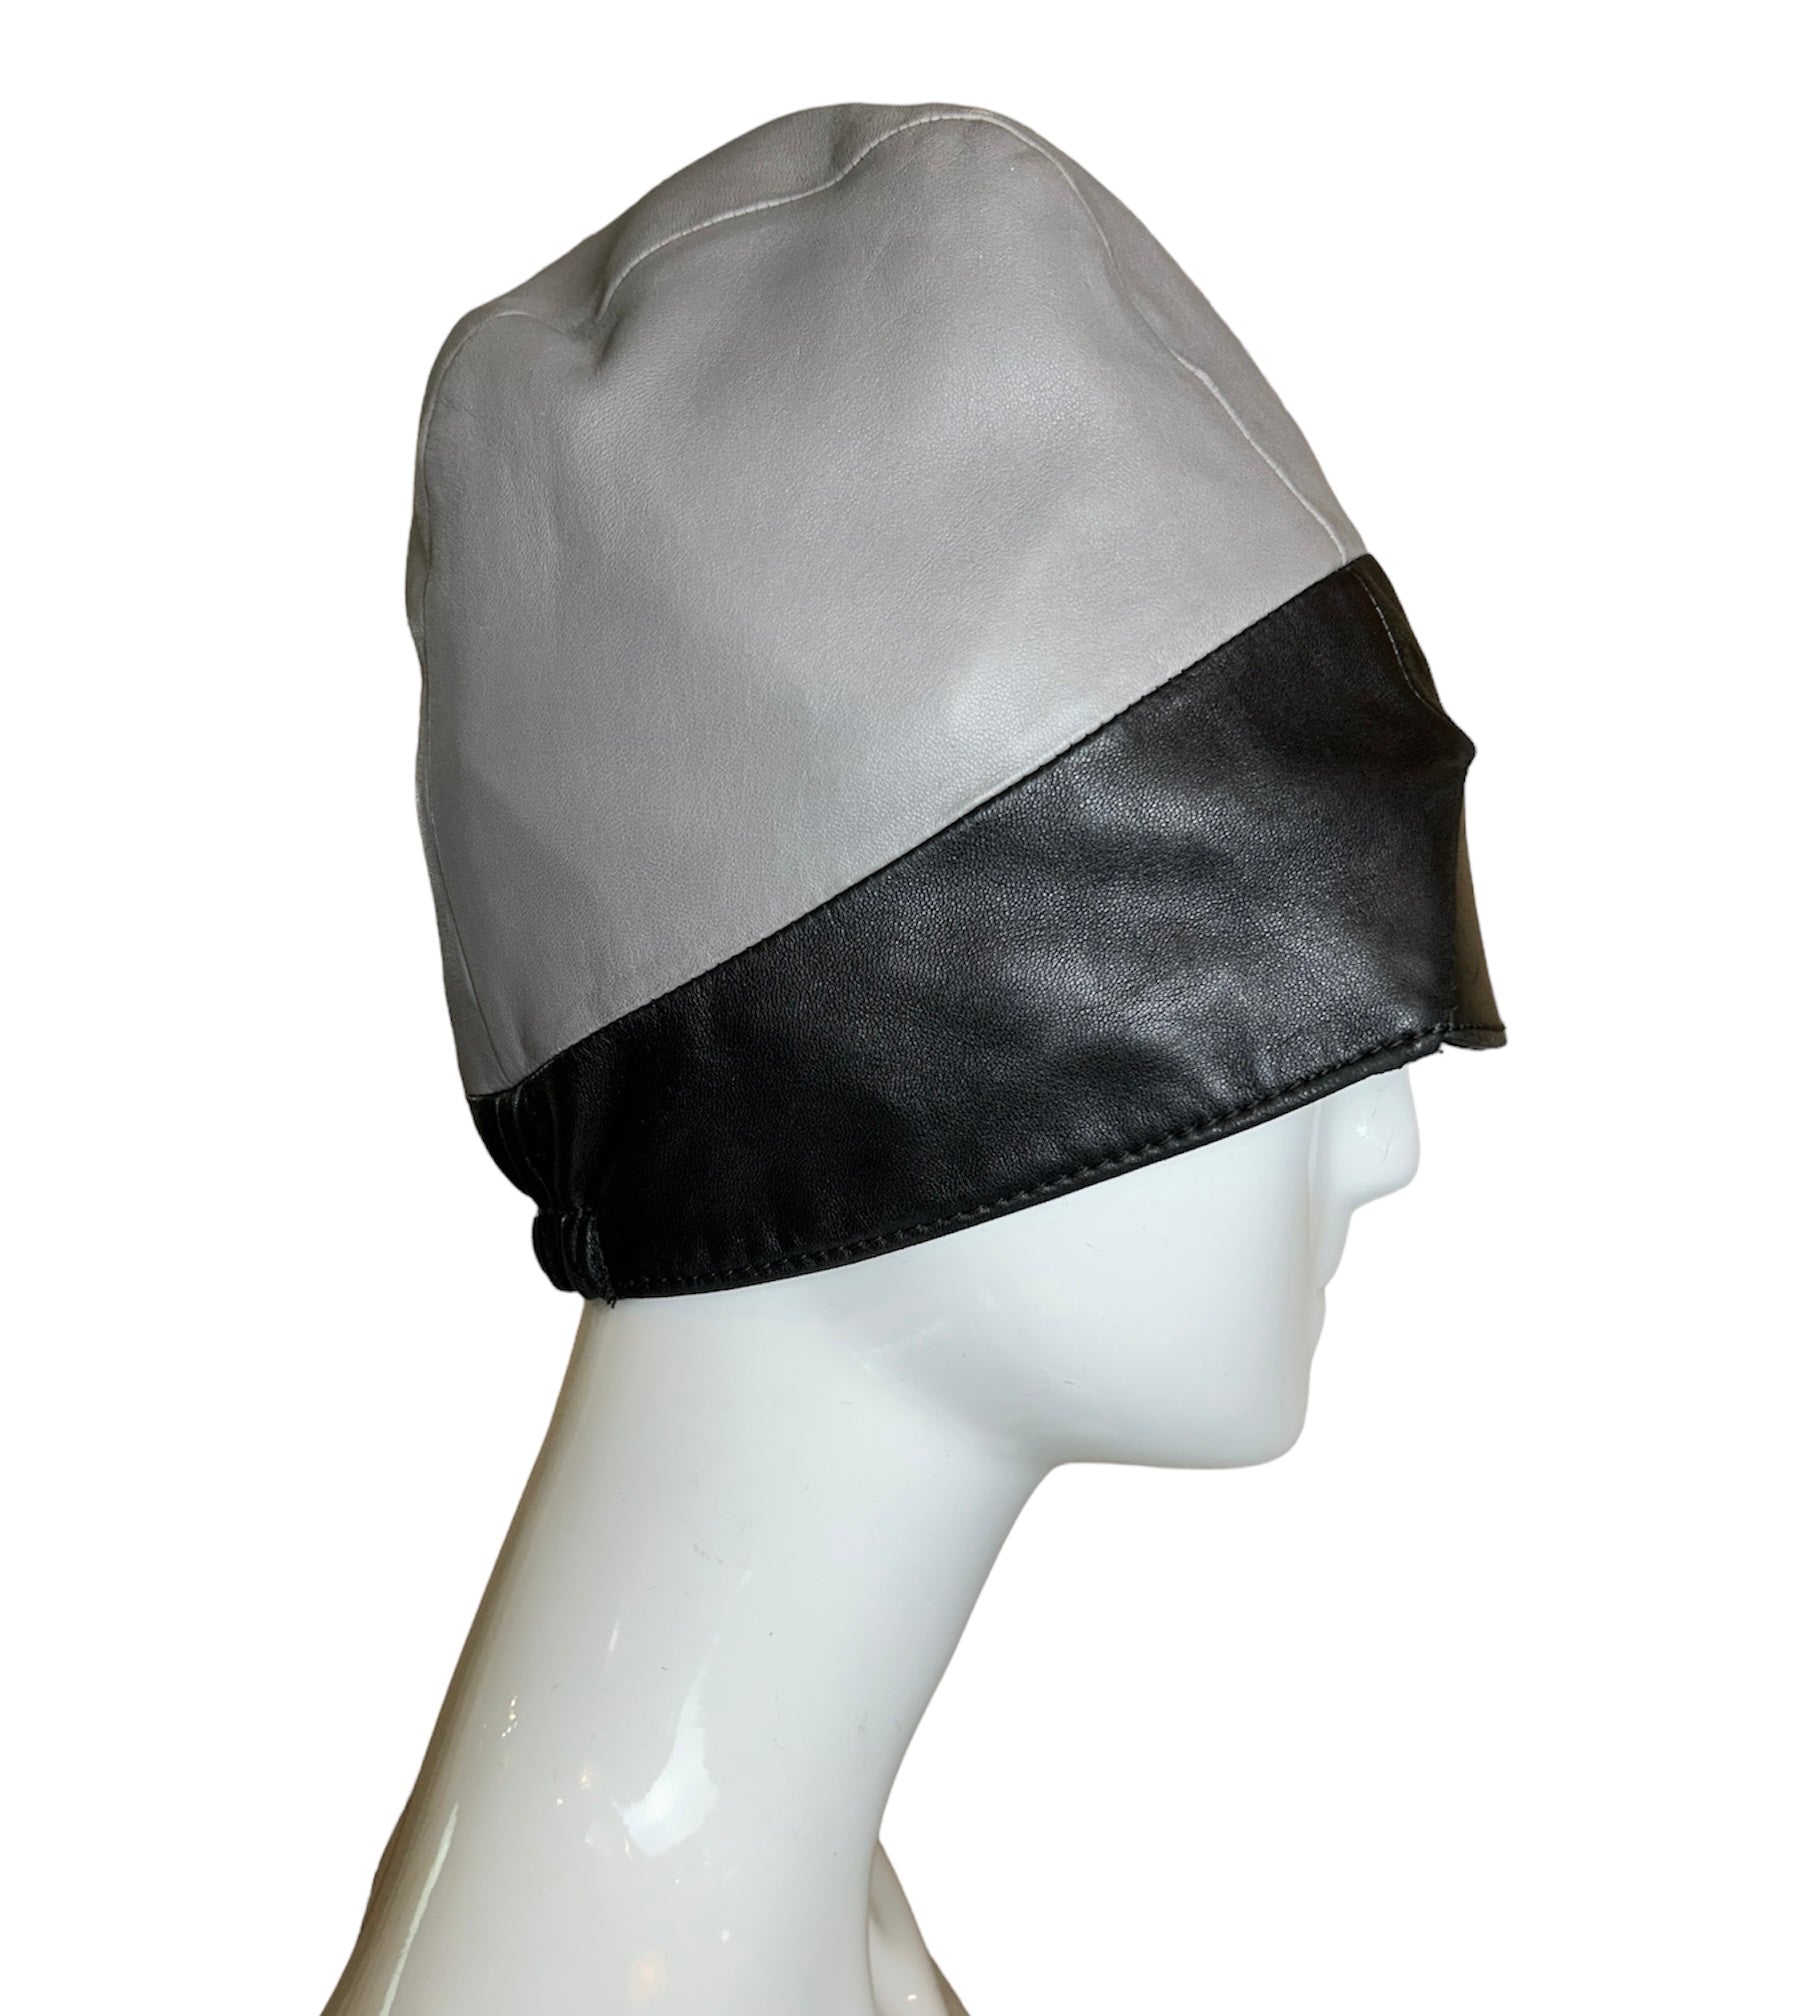 PRADA 60s Inspired Leather Cloche SIDE PHOTO 2 OF 4